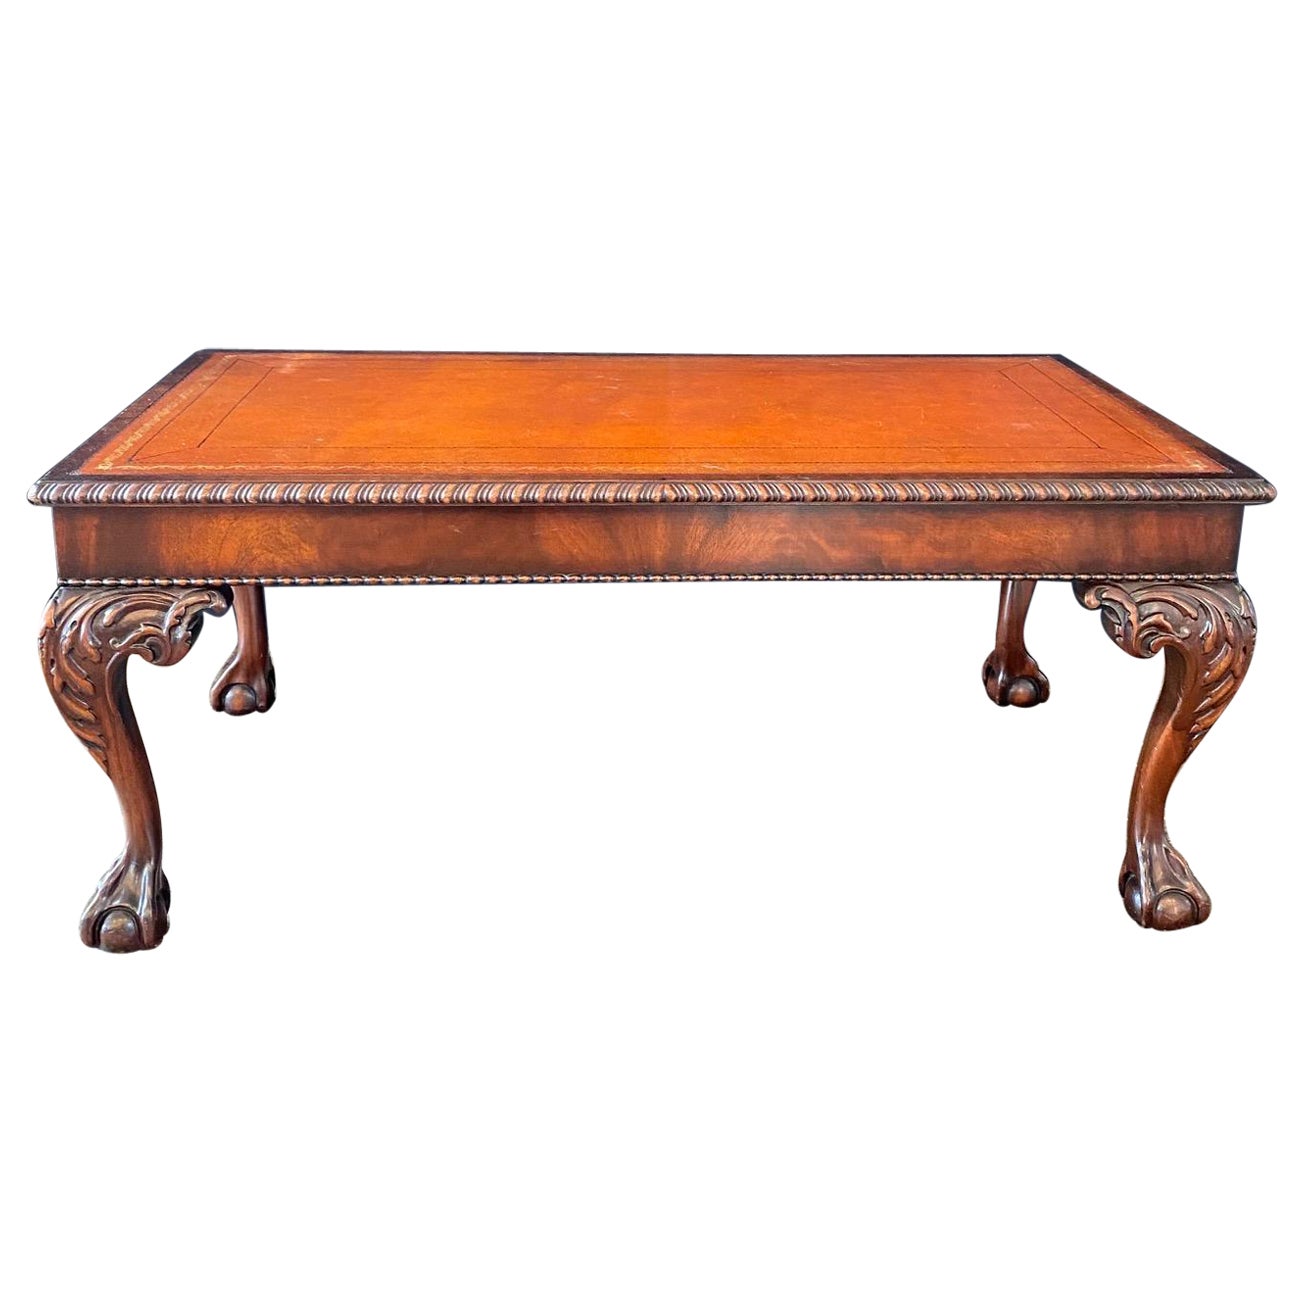  British Style Ball and Claw Foot Mahogany Coffee Table & Embossed Leather Top For Sale